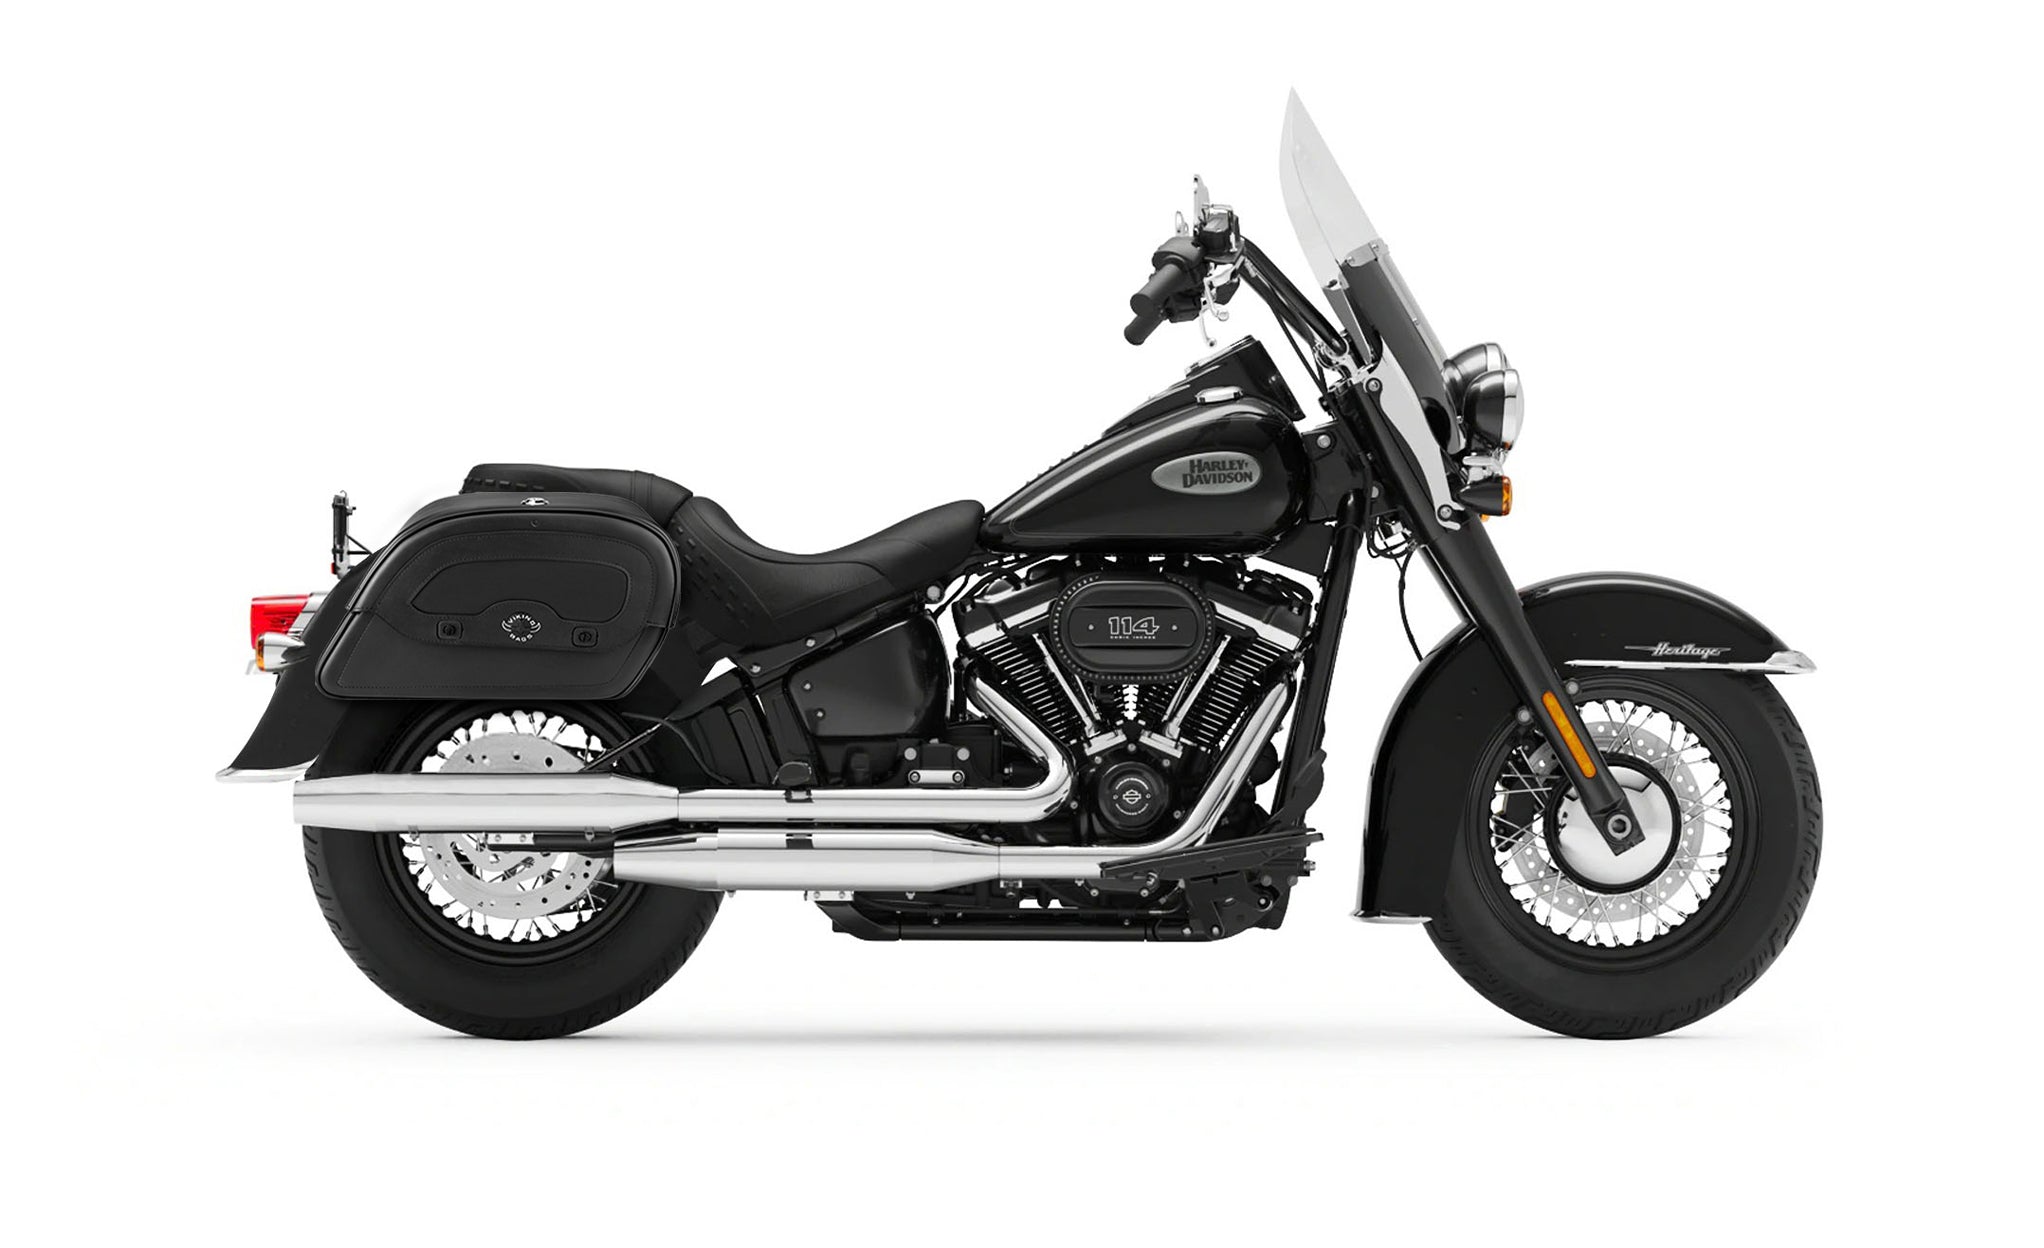 22L - Warrior Medium Quick-Mount Motorcycle Saddlebags For Harley Softail Heritage FLHC/S @expand